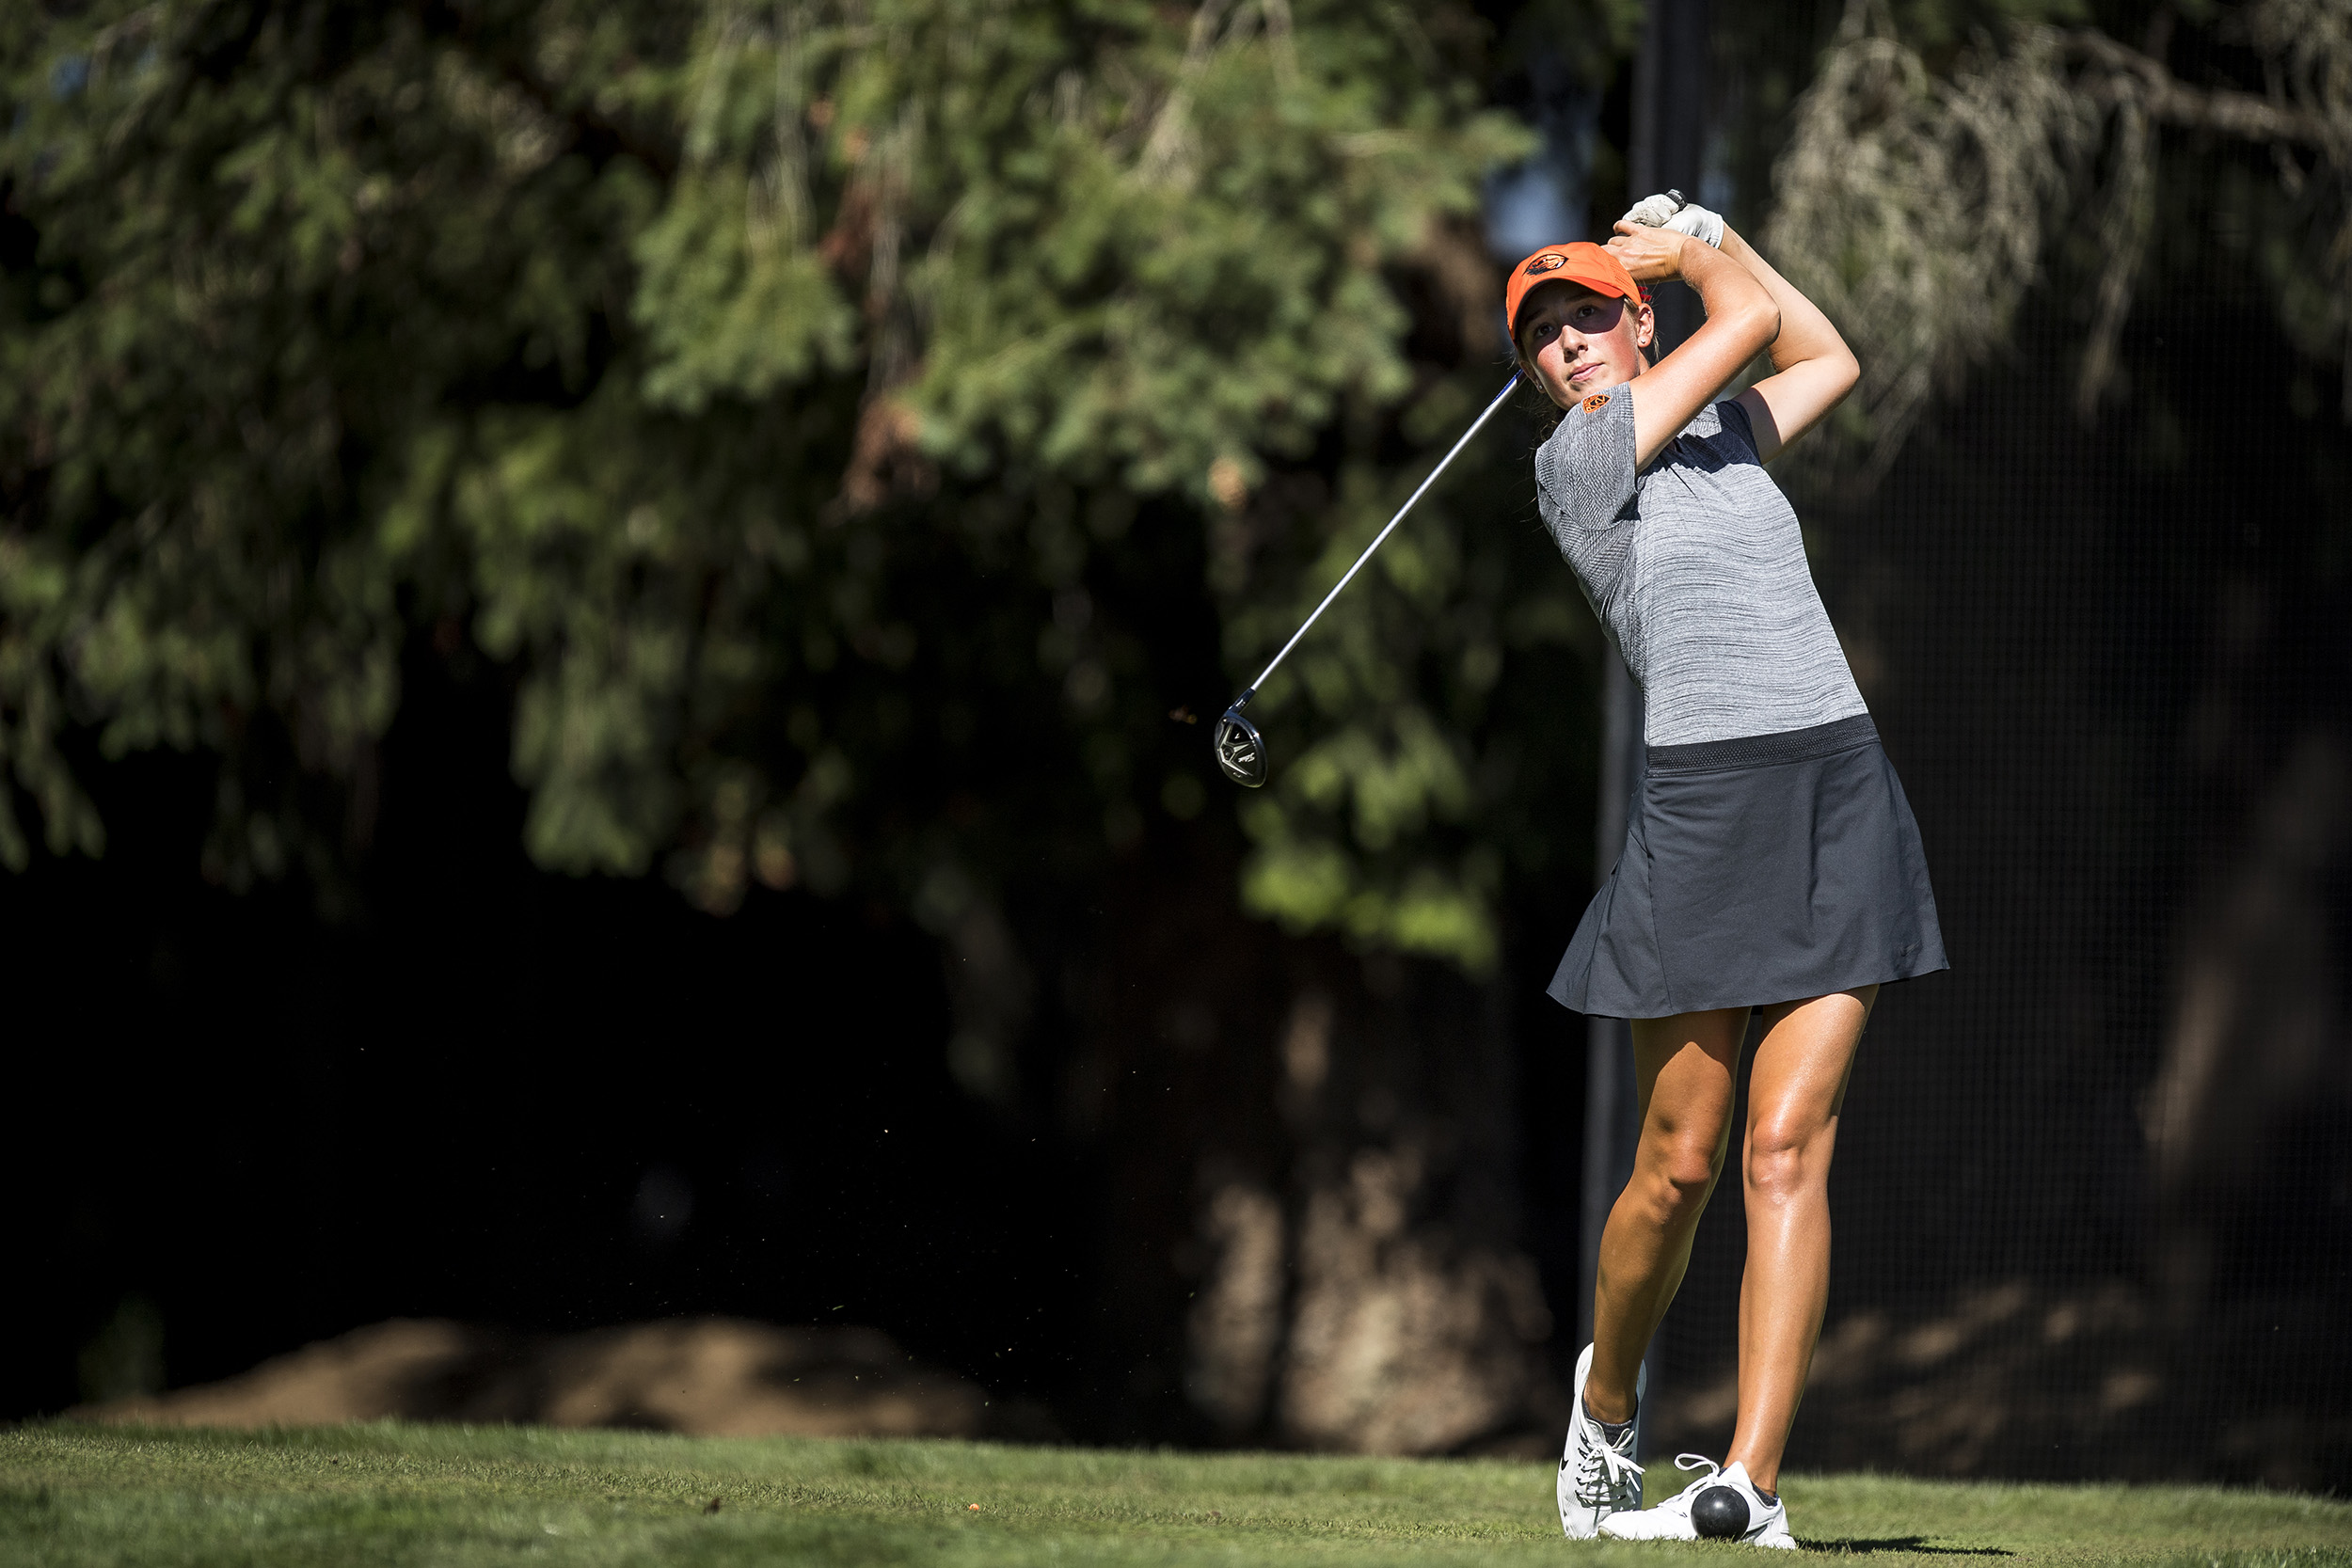 Ellie Slama: For OSU star, golf has been a family passion